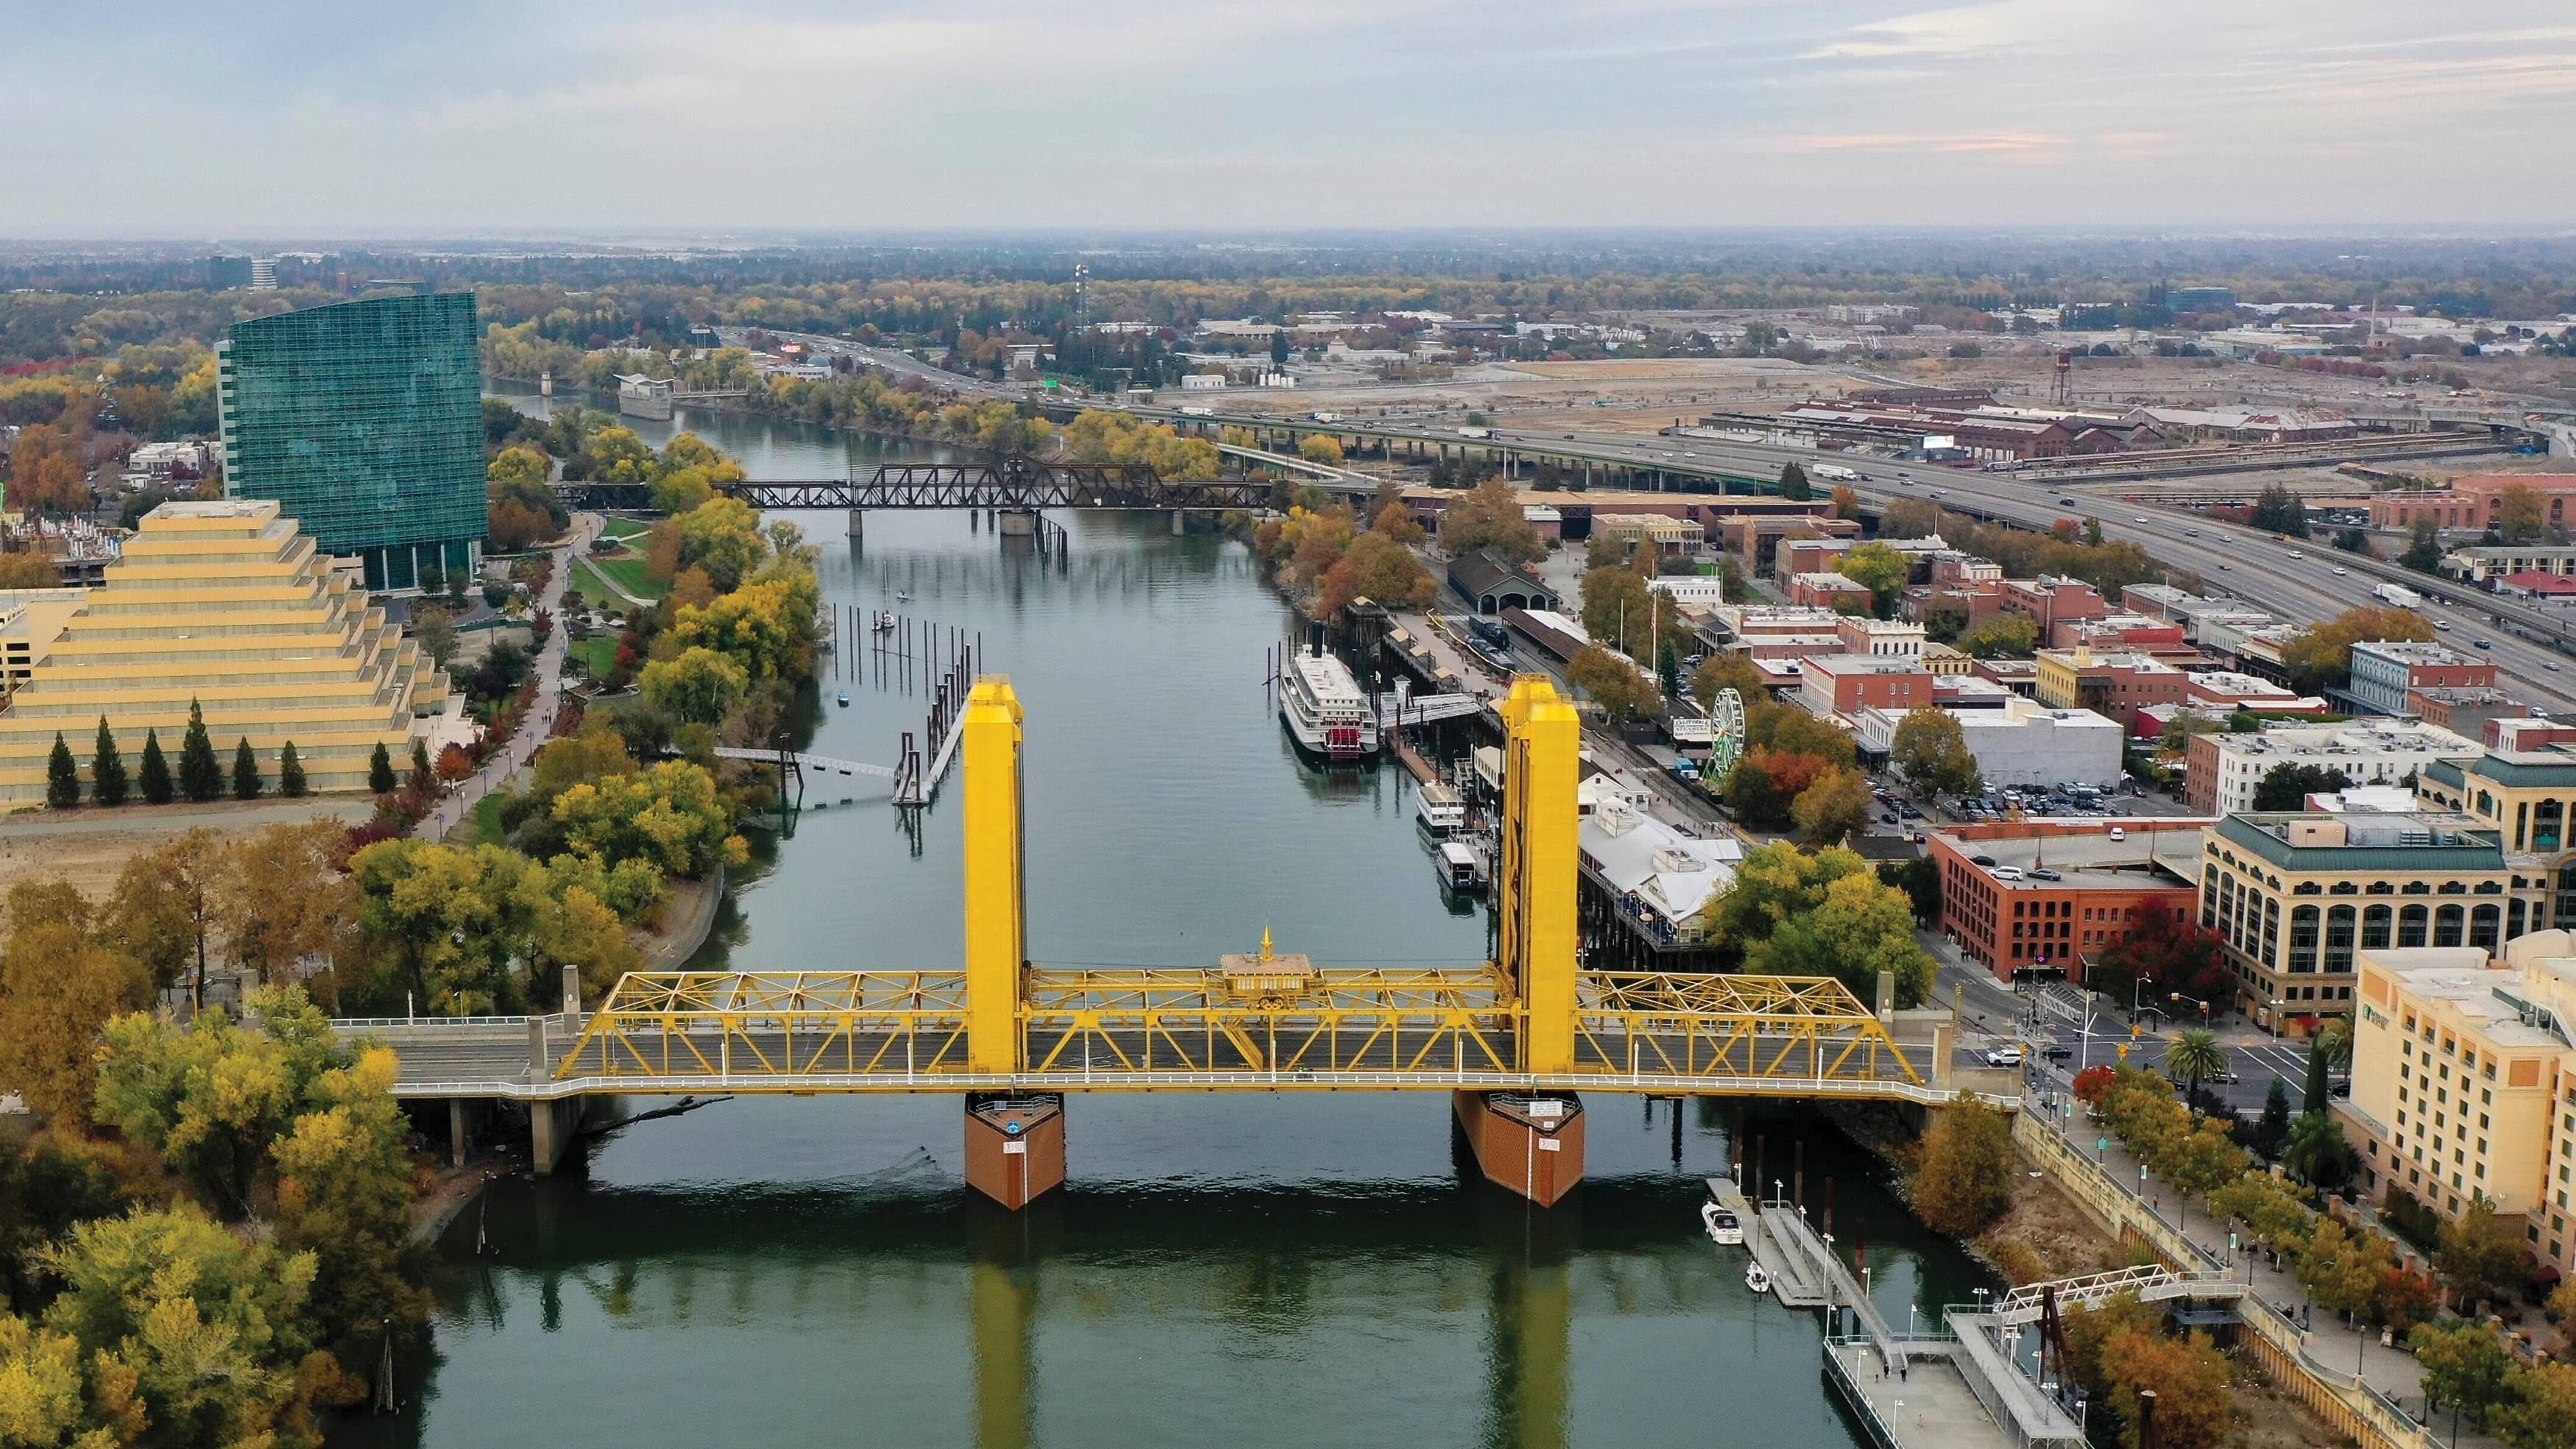 Aerial view of the famed Sacramento waterfront and its golden bridge